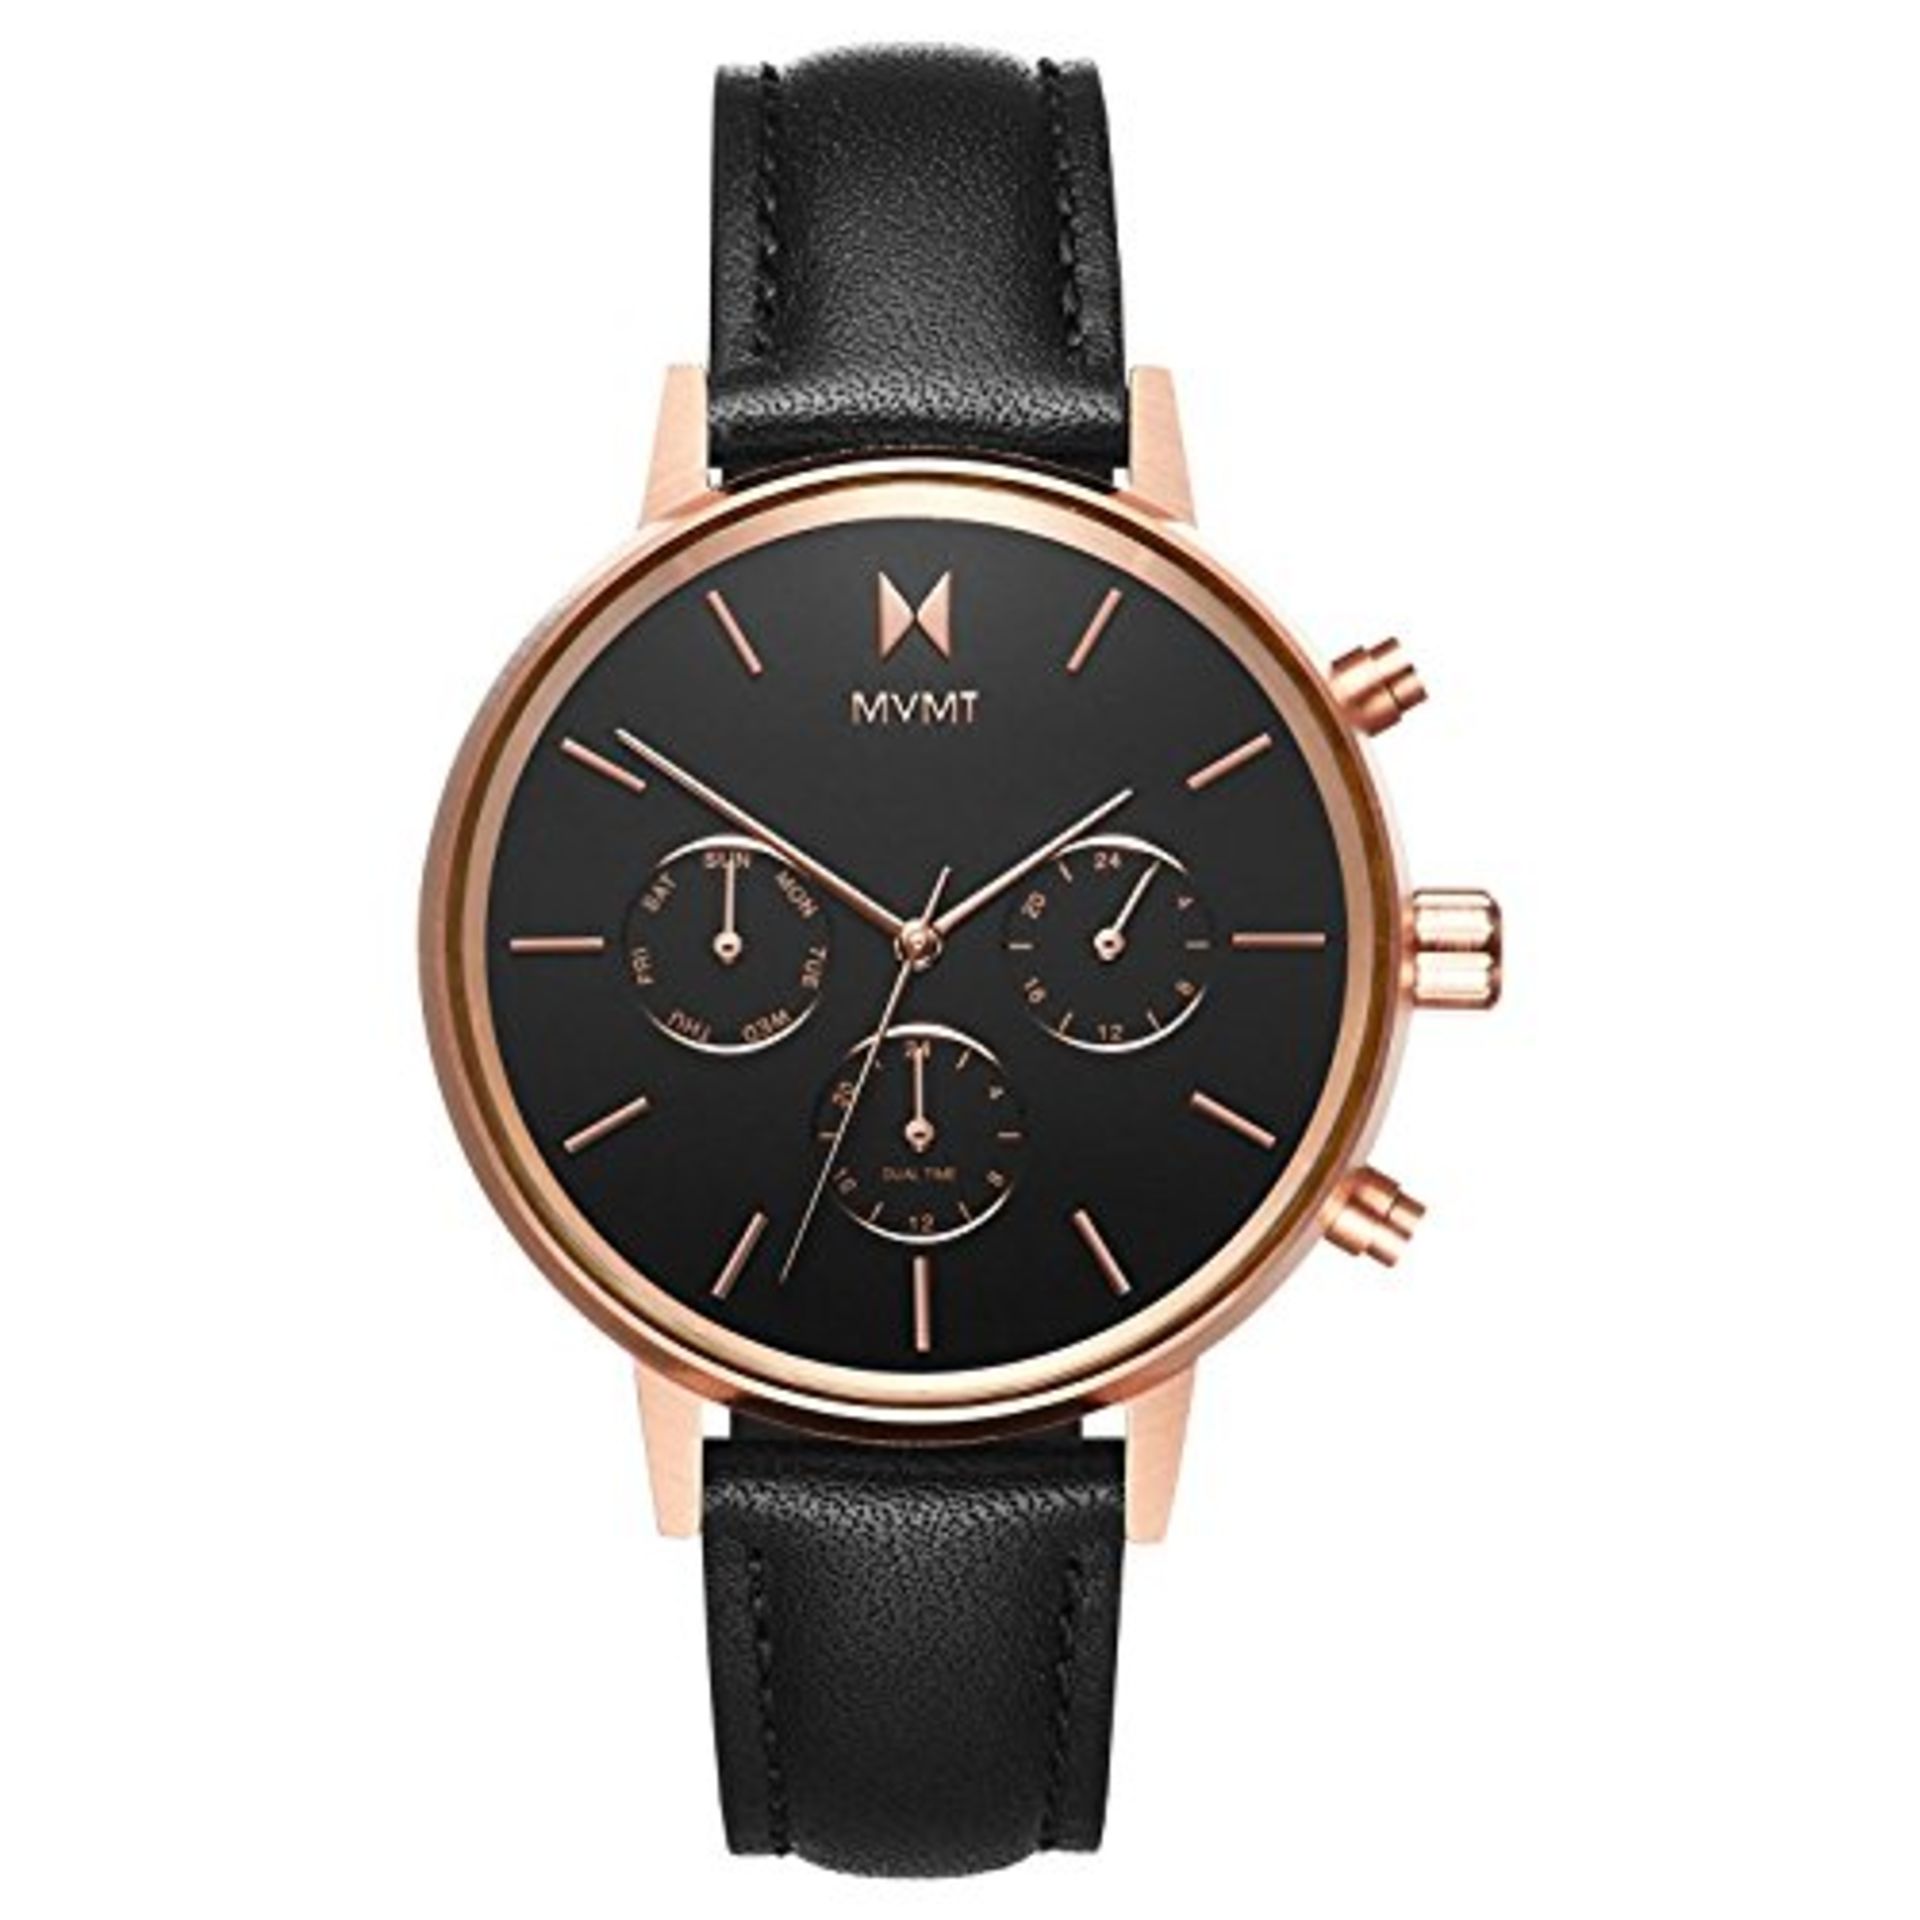 RRP £61.00 Analog quartz watch for women with black leather strap - D-Fc01-Rgbl